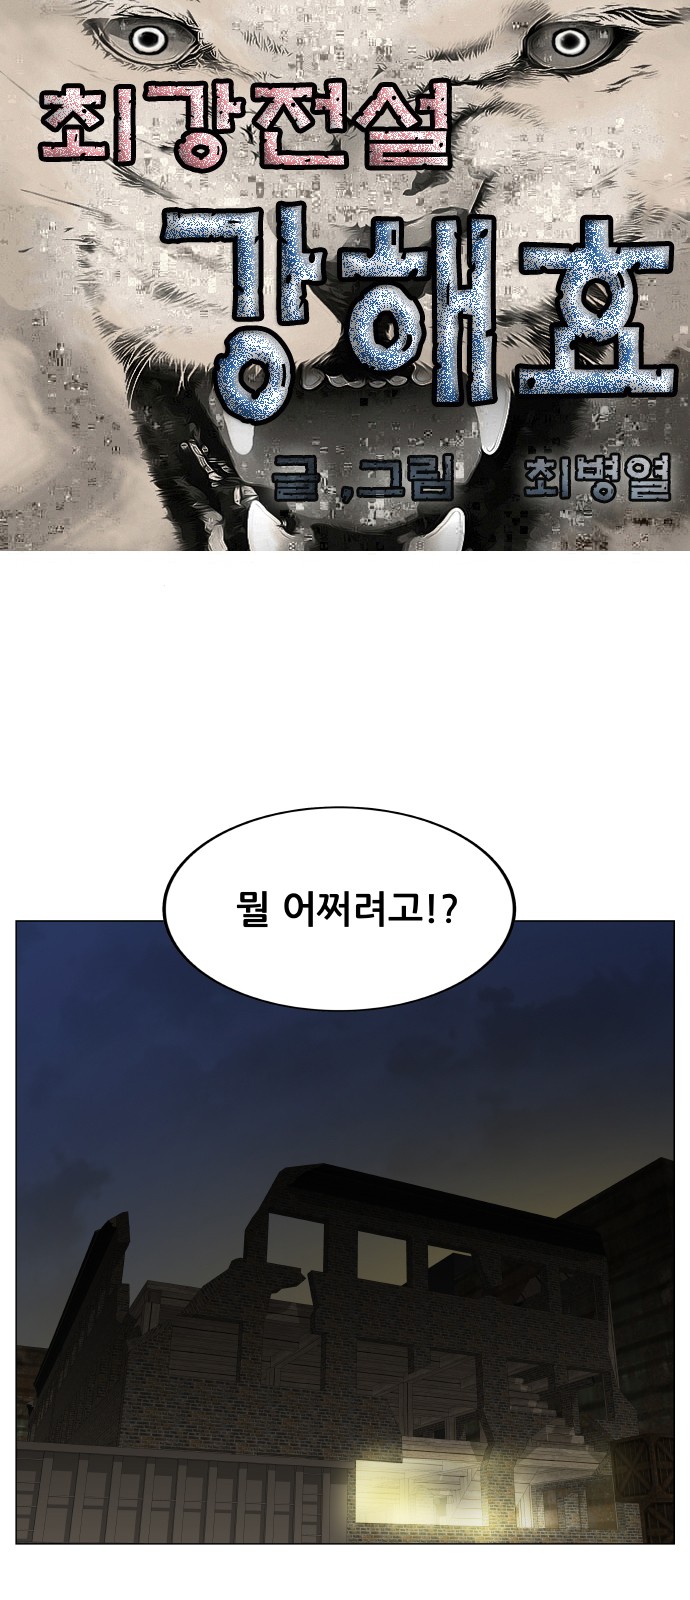 Ultimate Legend - Kang Hae Hyo - Chapter 388 - Page 1